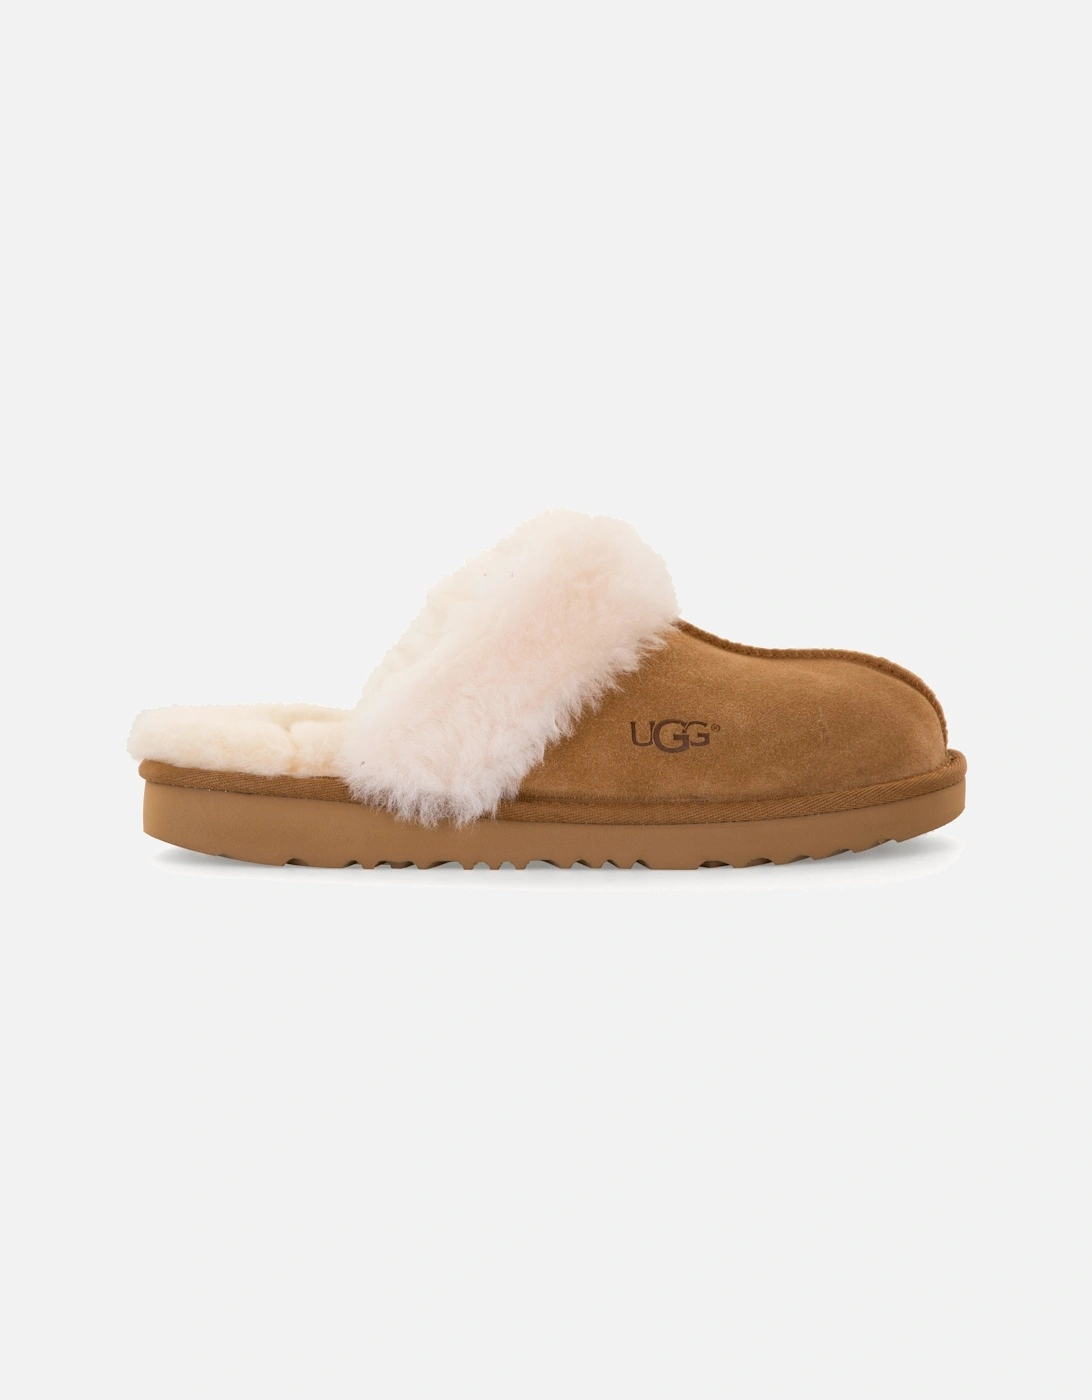 Youths Cozy 11 Slippers (Chestnut)